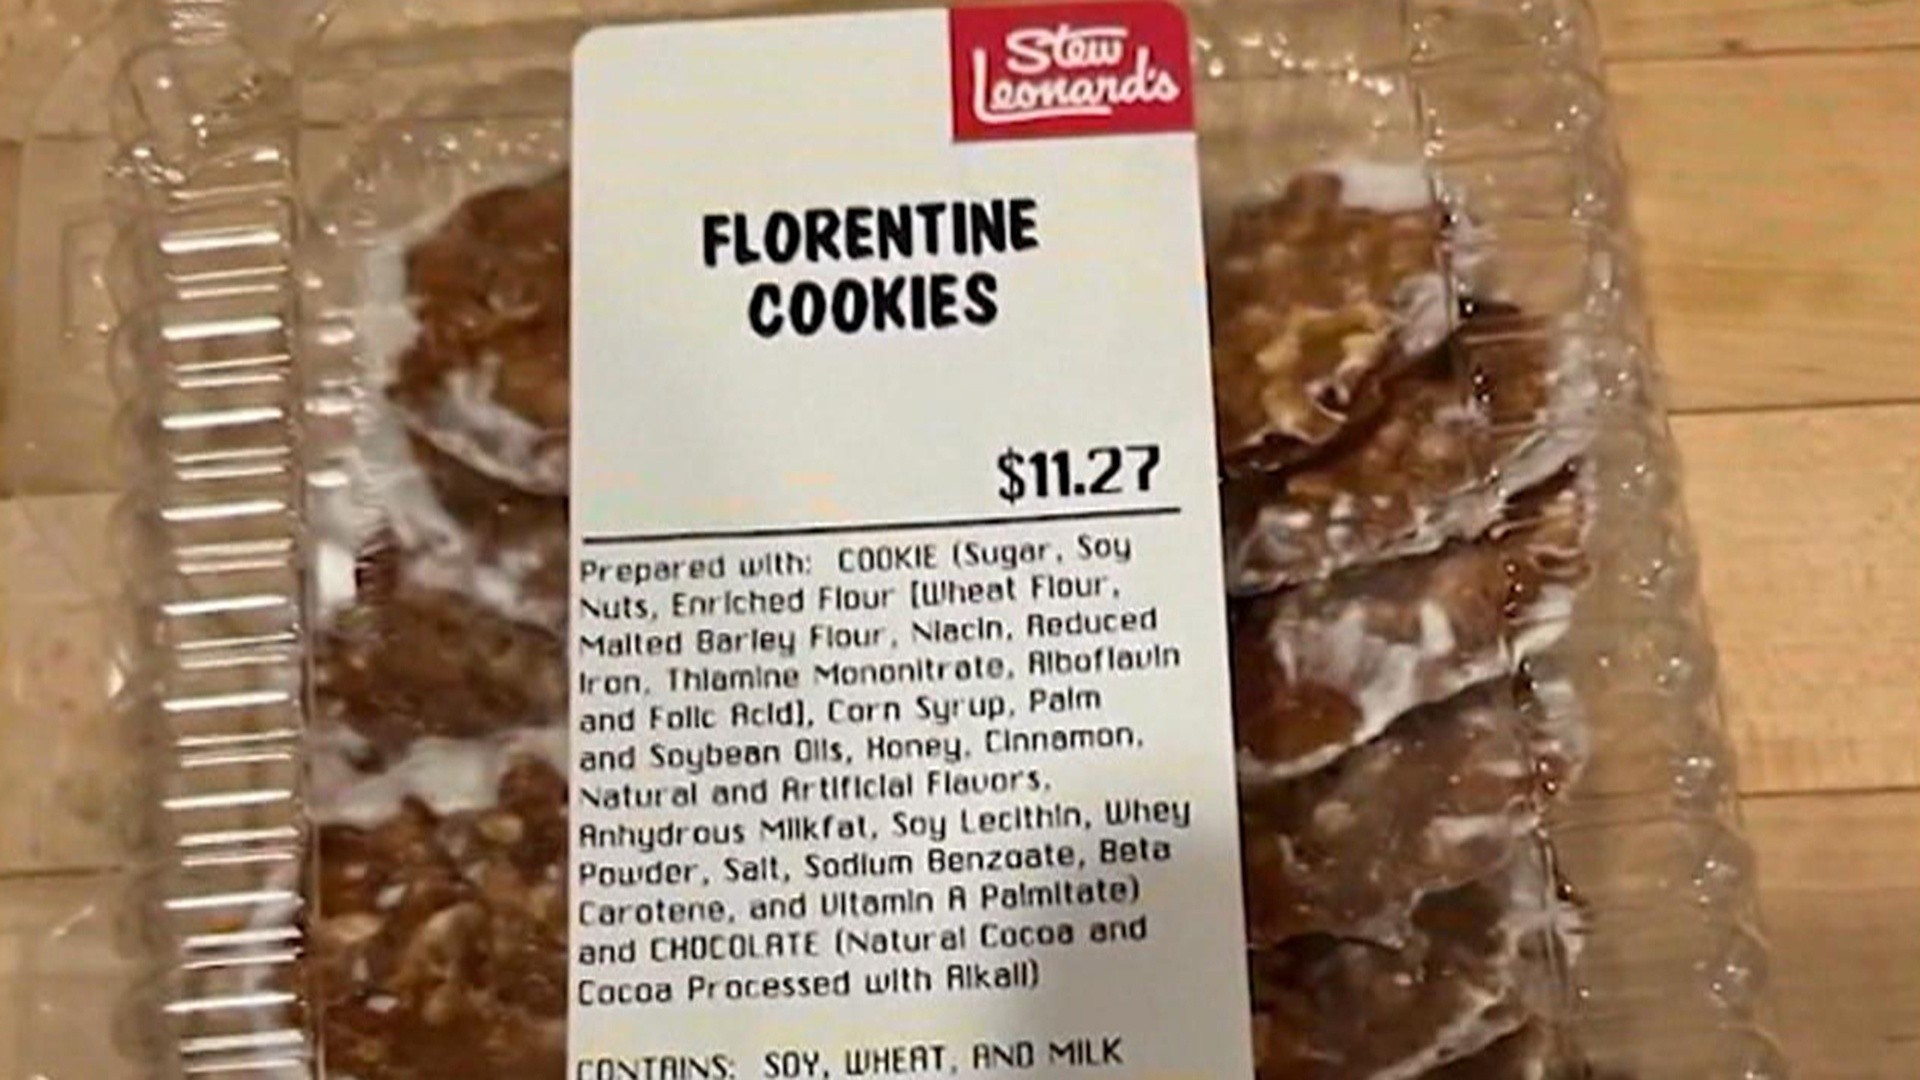 Woman dies from peanut allergy after eating mislabeled cookies